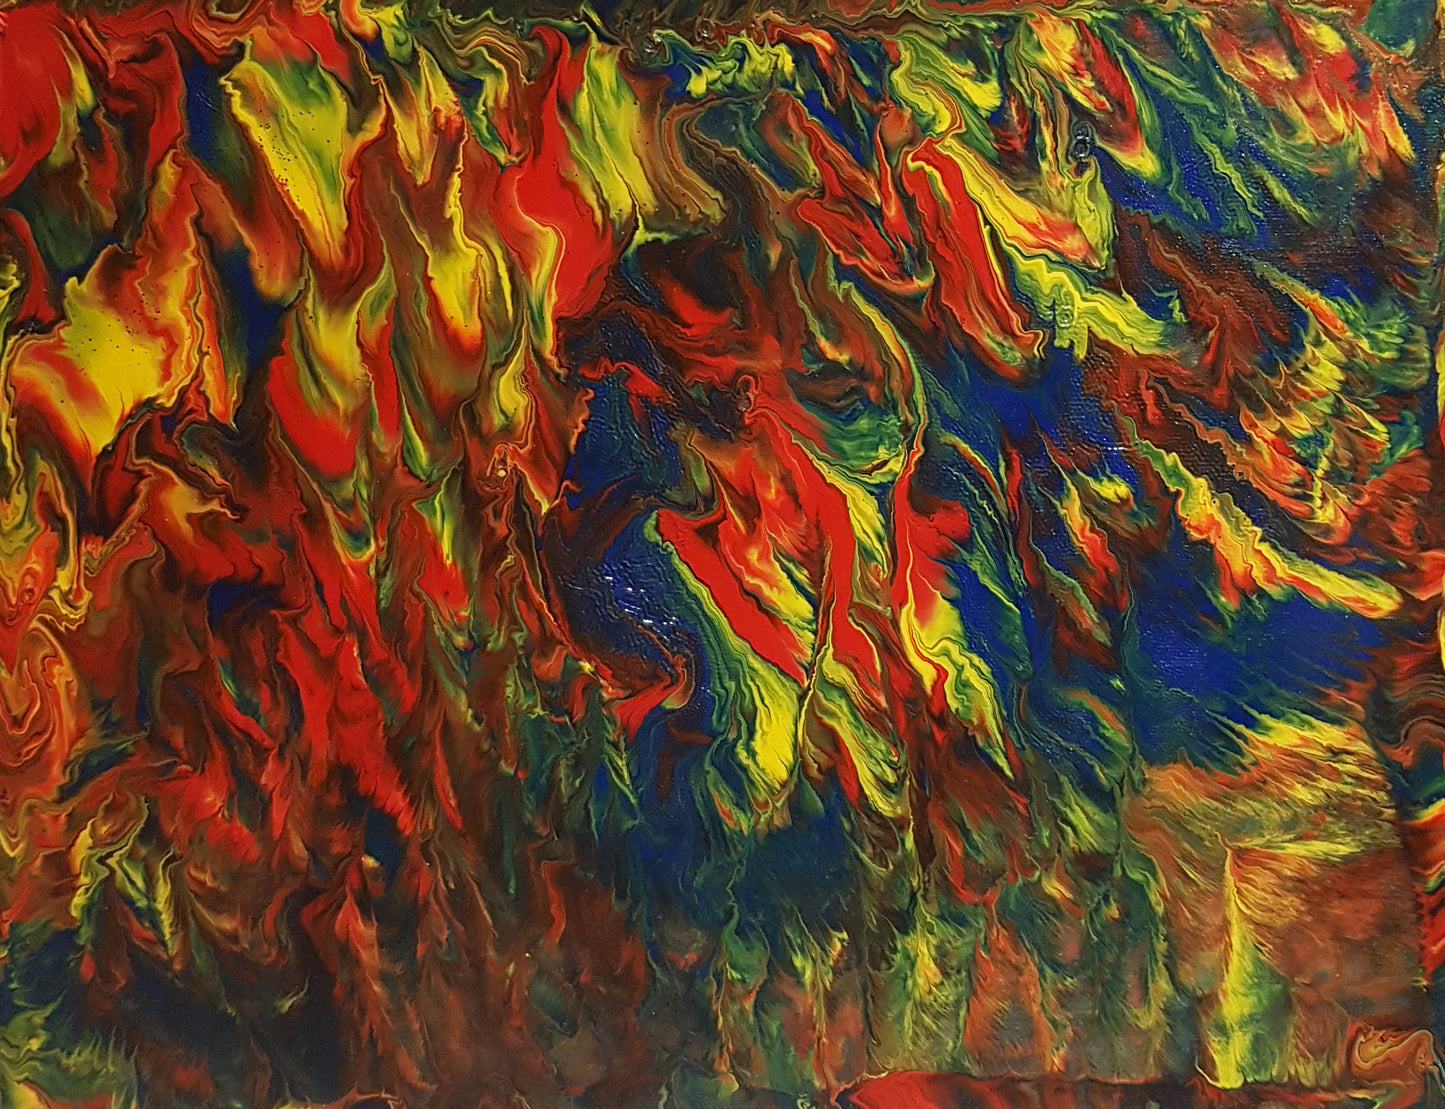 Primary-Flames-of-Passion-by-Alexandra-Romano-Art-Beautiful-Fiery-Abstract-Paintings-Sale-Blue-Red-Yellow-Colourful-Acrylic-on-Wood